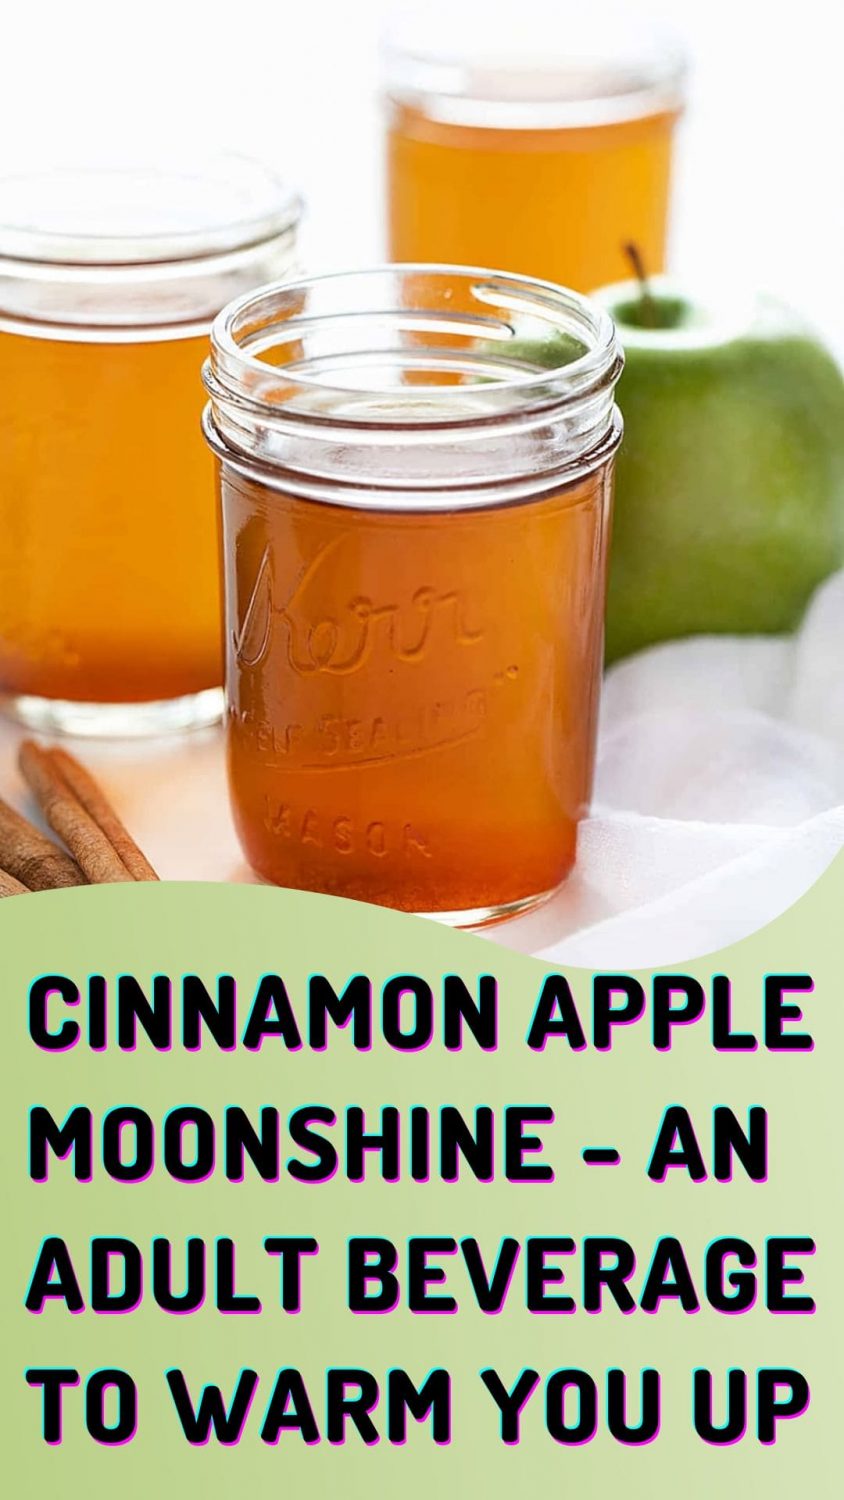 Cinnamon Apple Moonshine - An Adult Beverage To Warm You Up